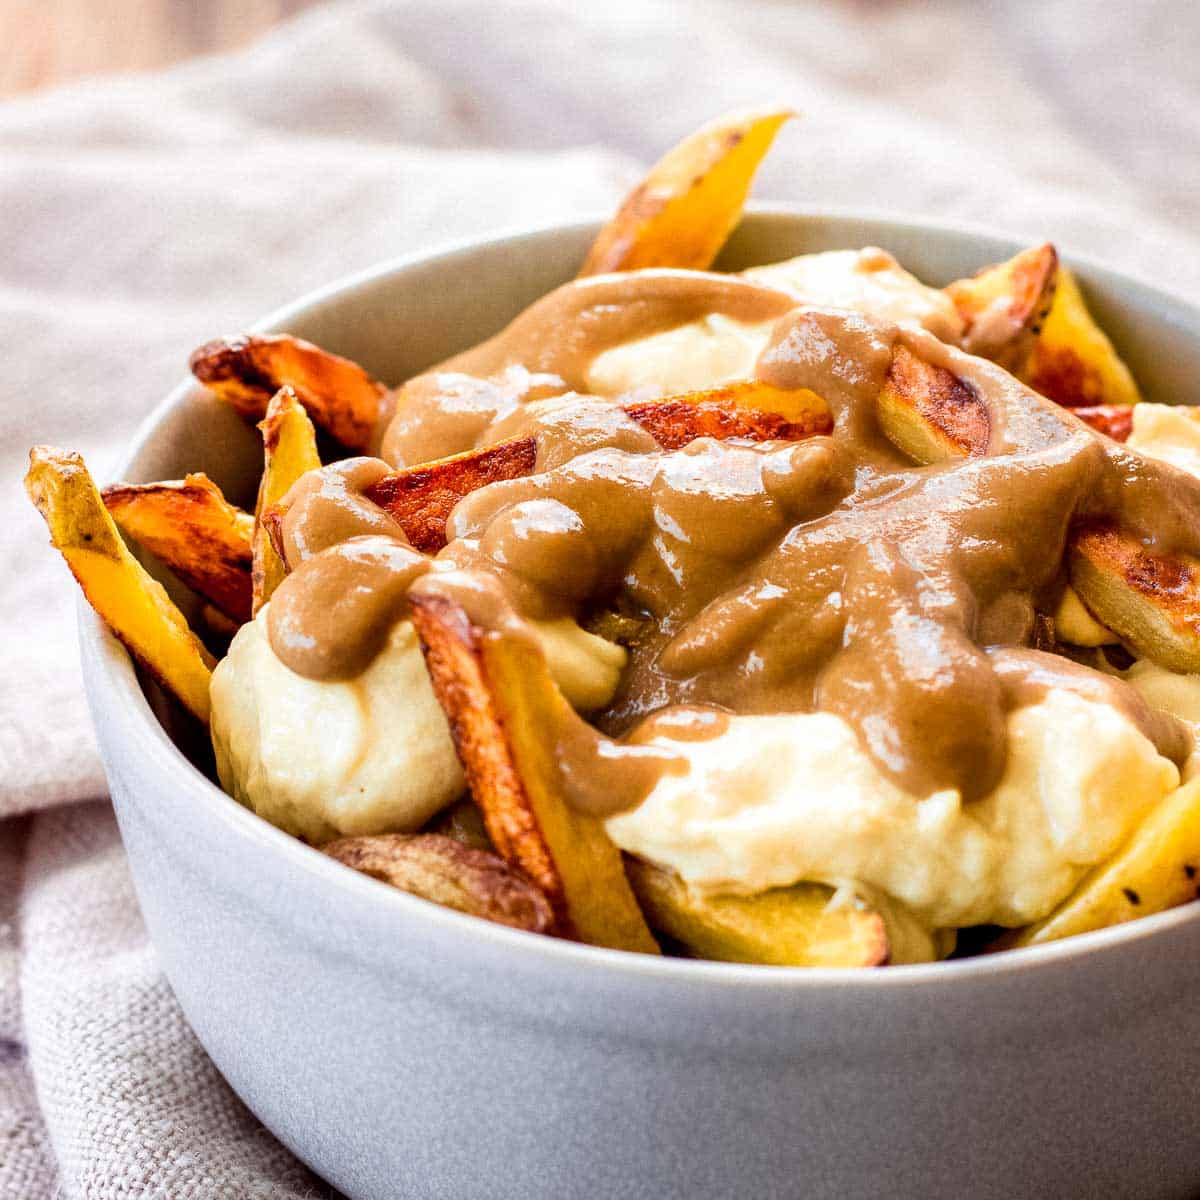 Bowl of vegan poutine by Vancouver with Love, showing fries topped with gravy and vegan cheese curds